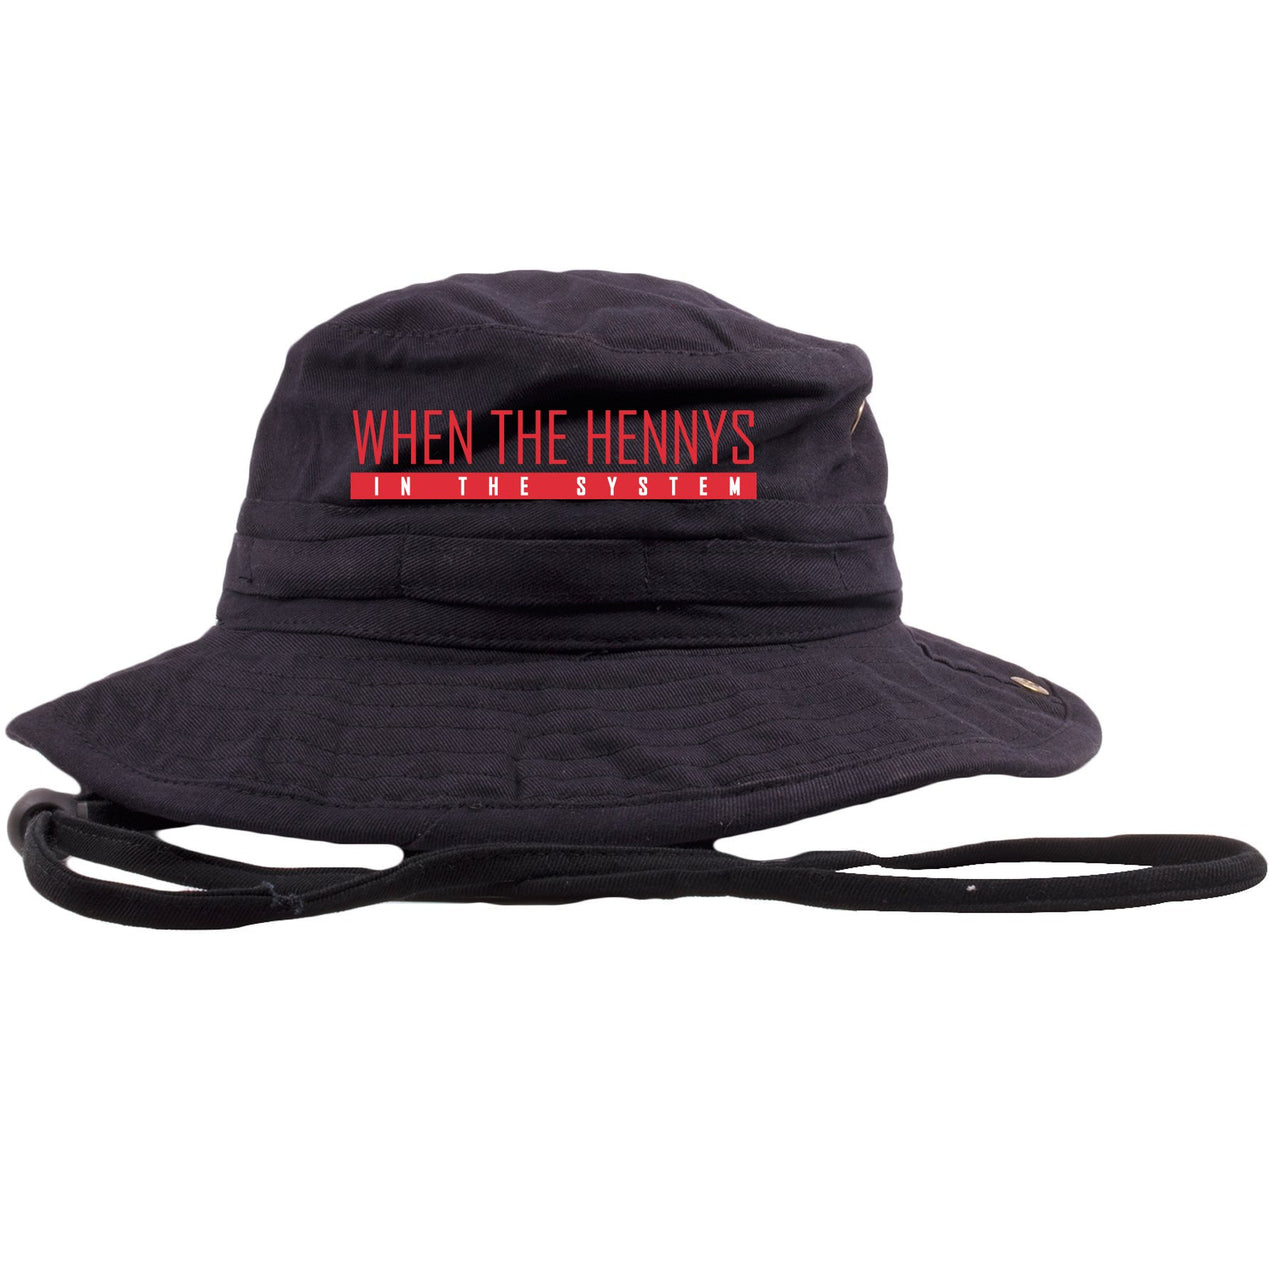 Bred 2019 4s Bucket Hat | When the Hennys, Black